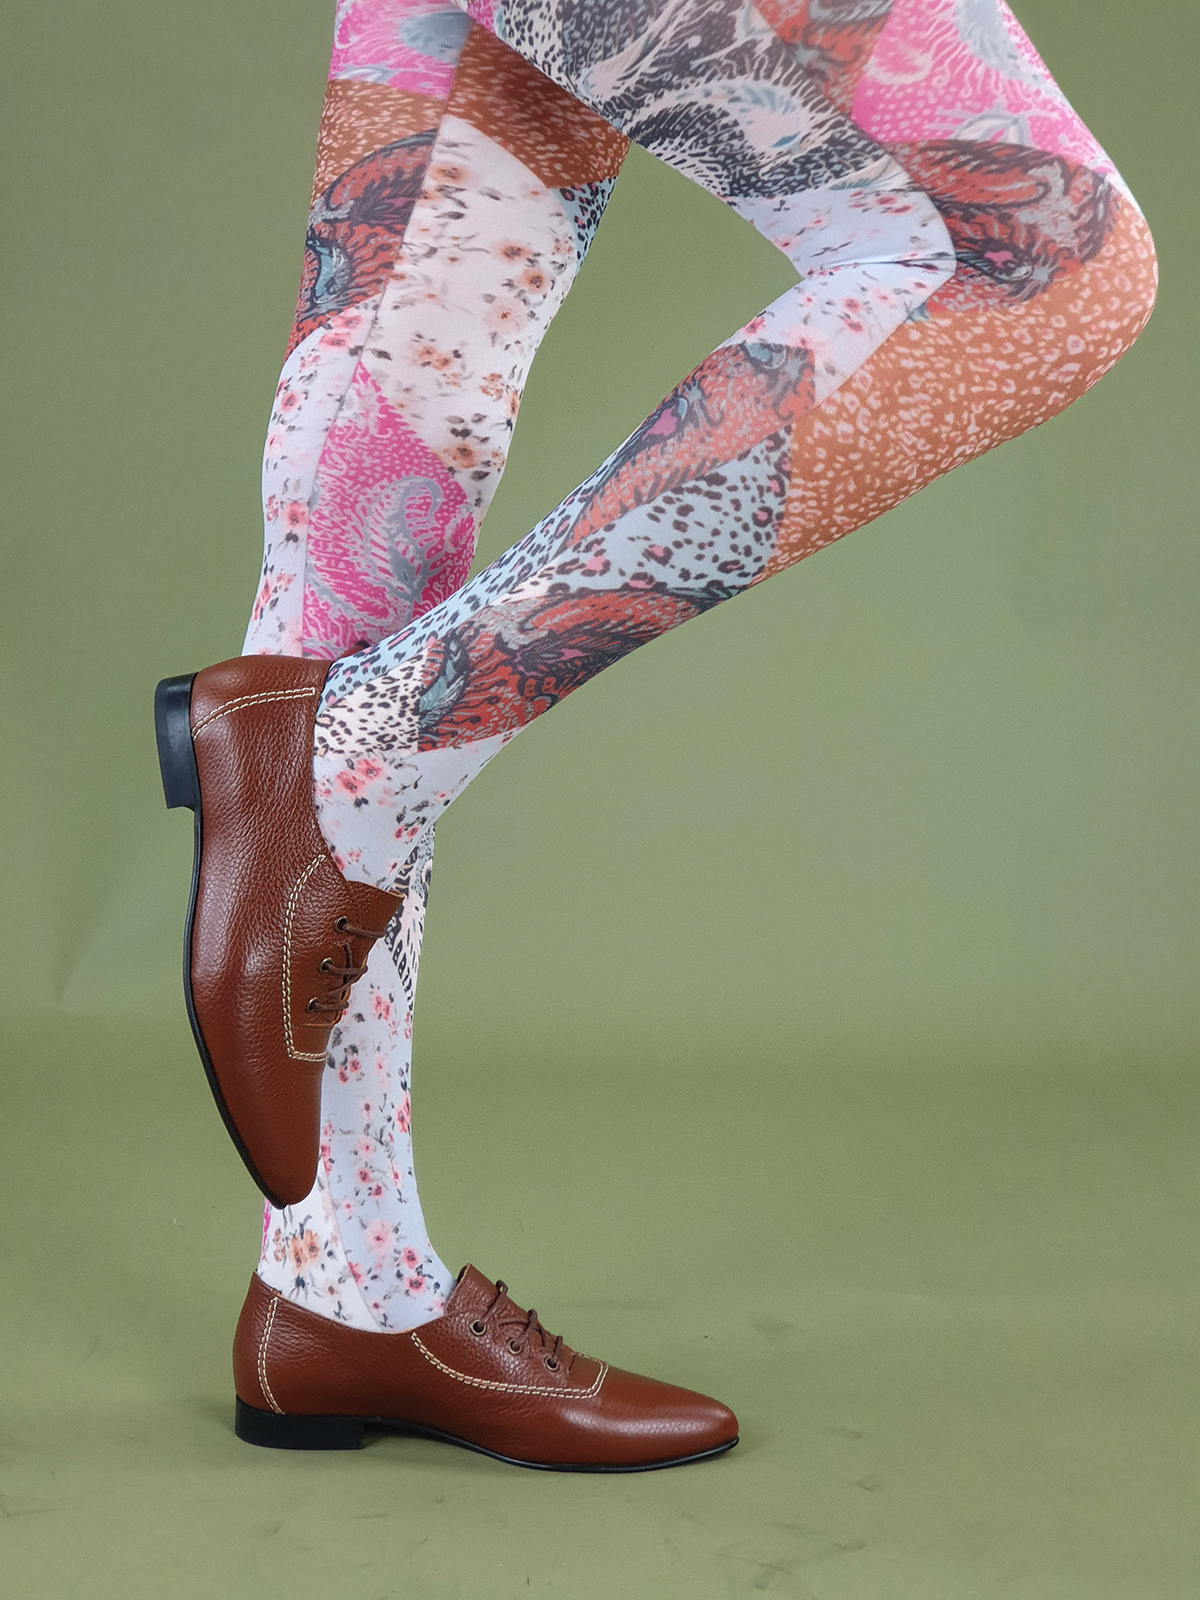 Paisley Patchwork Tights – ladies vintage retro 60s – 70s style – Mod Shoes